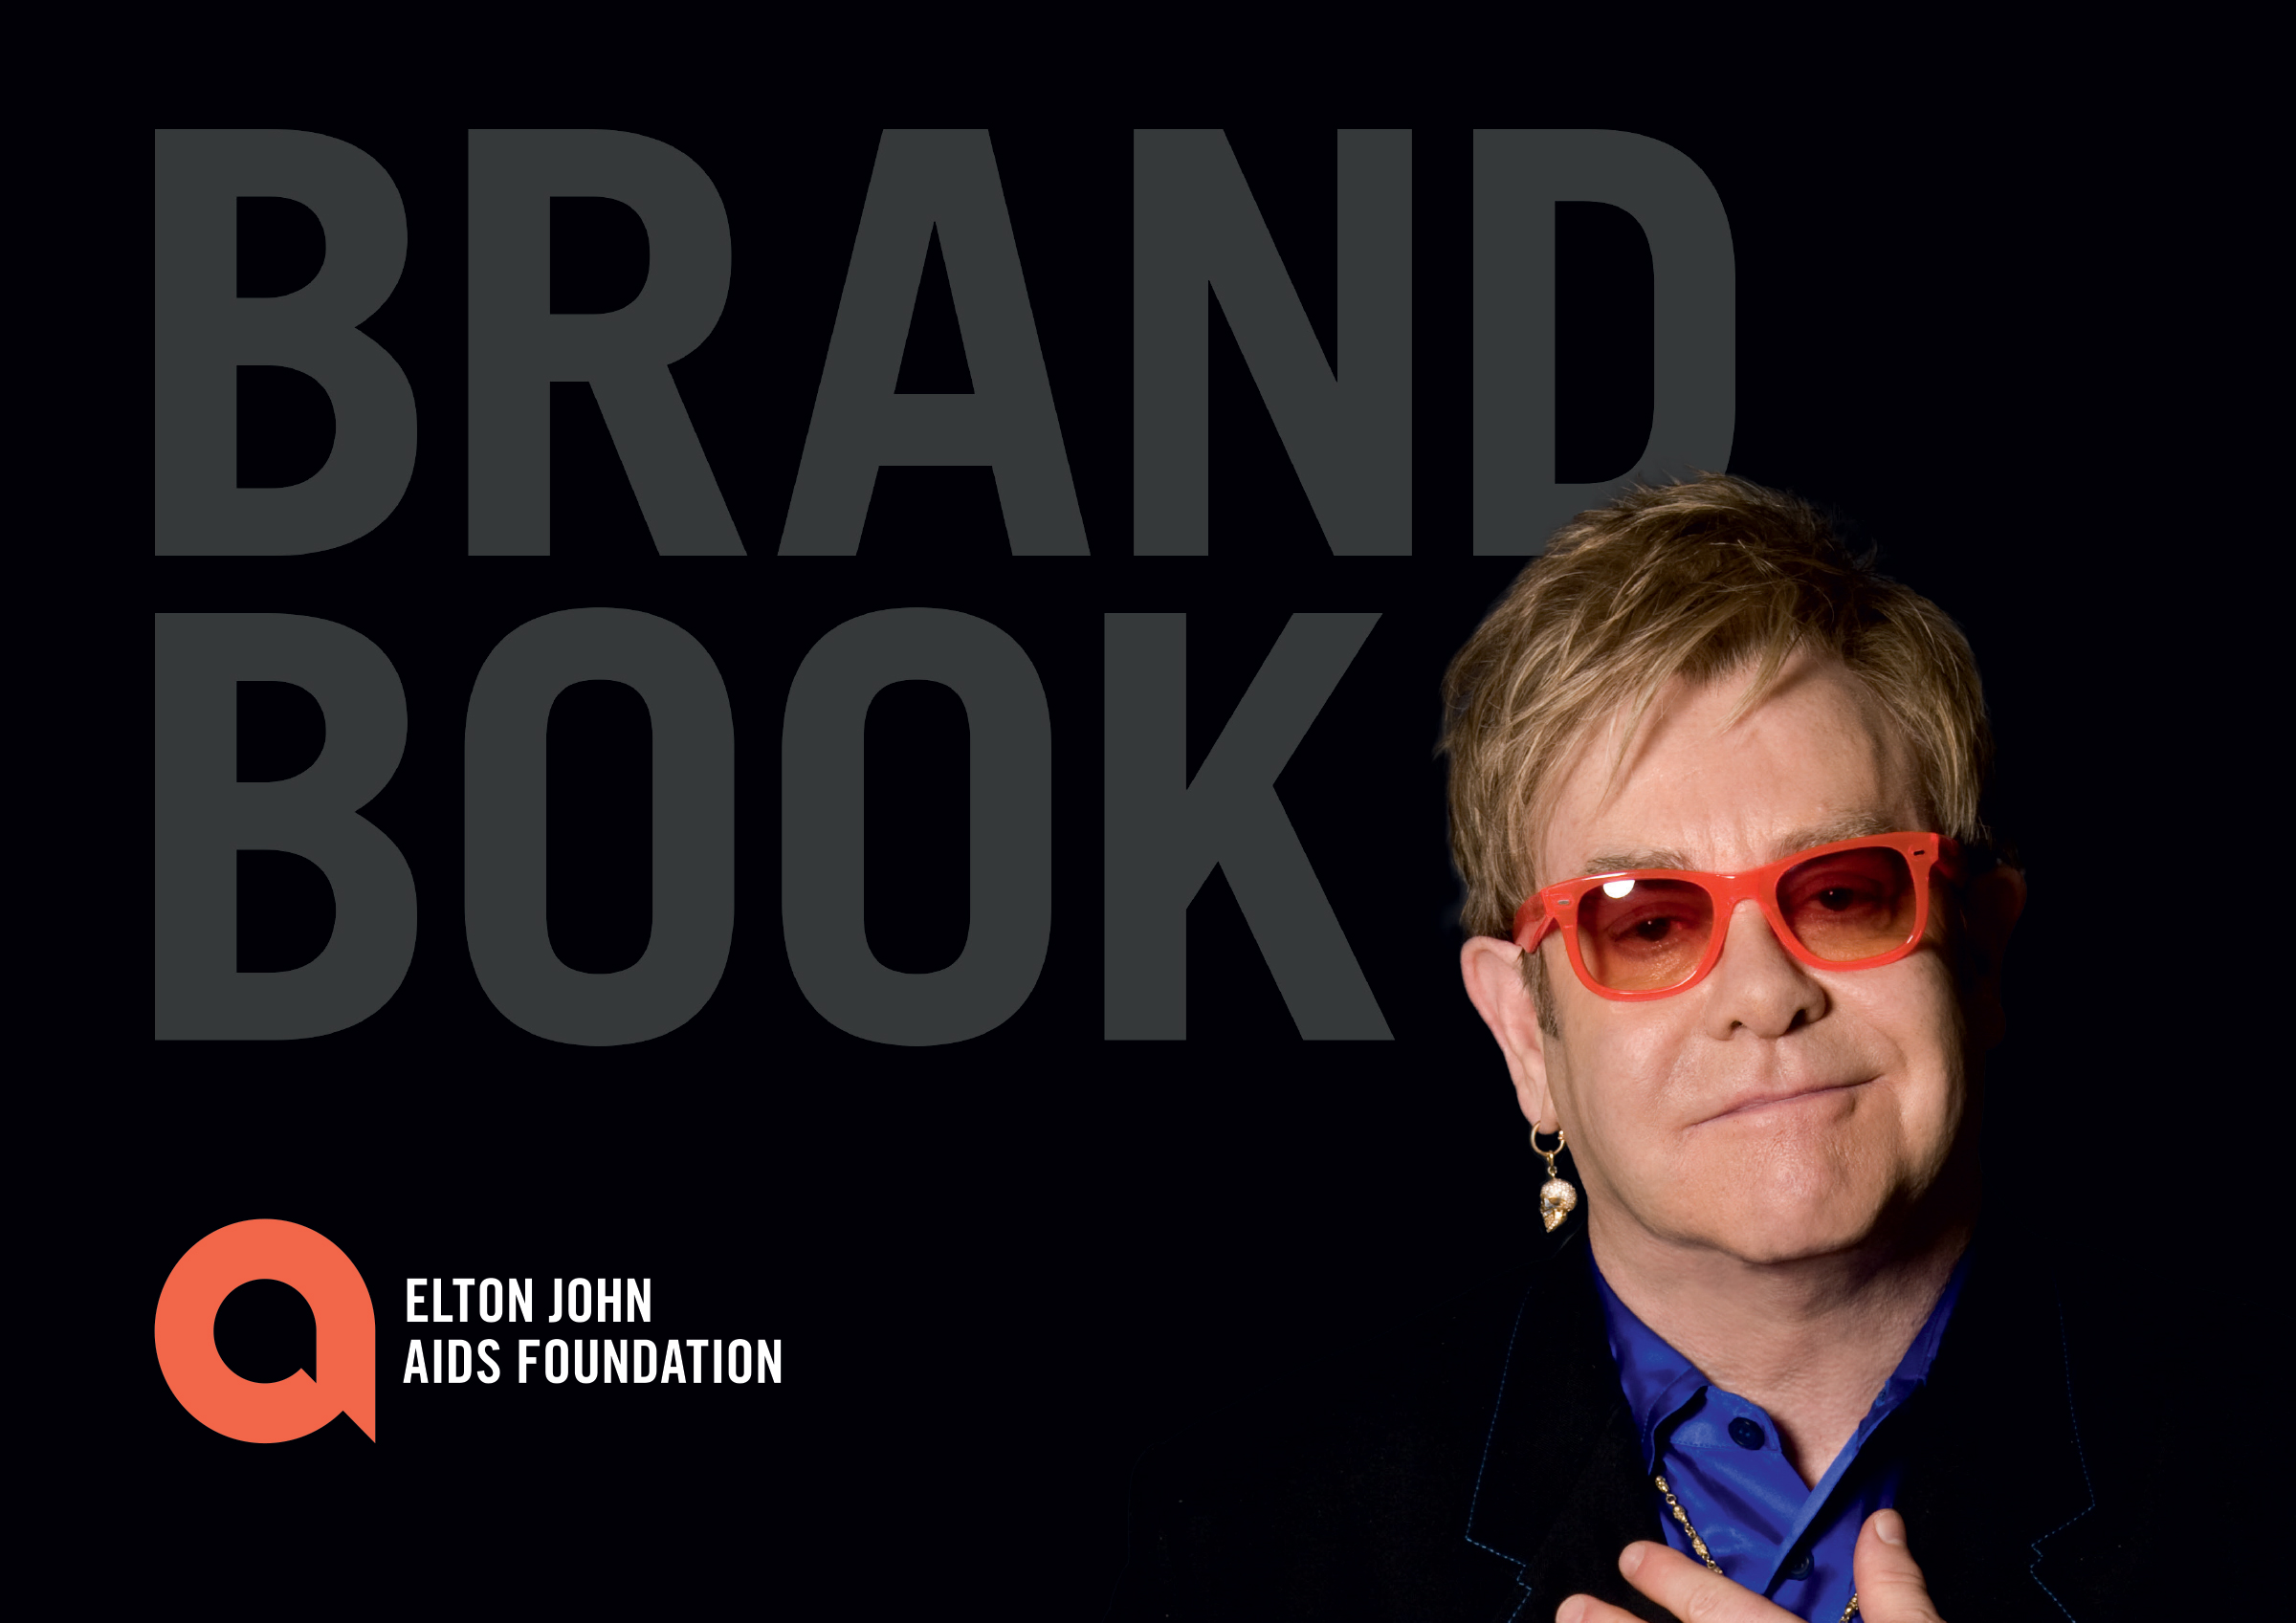 Brand specialists brand book example